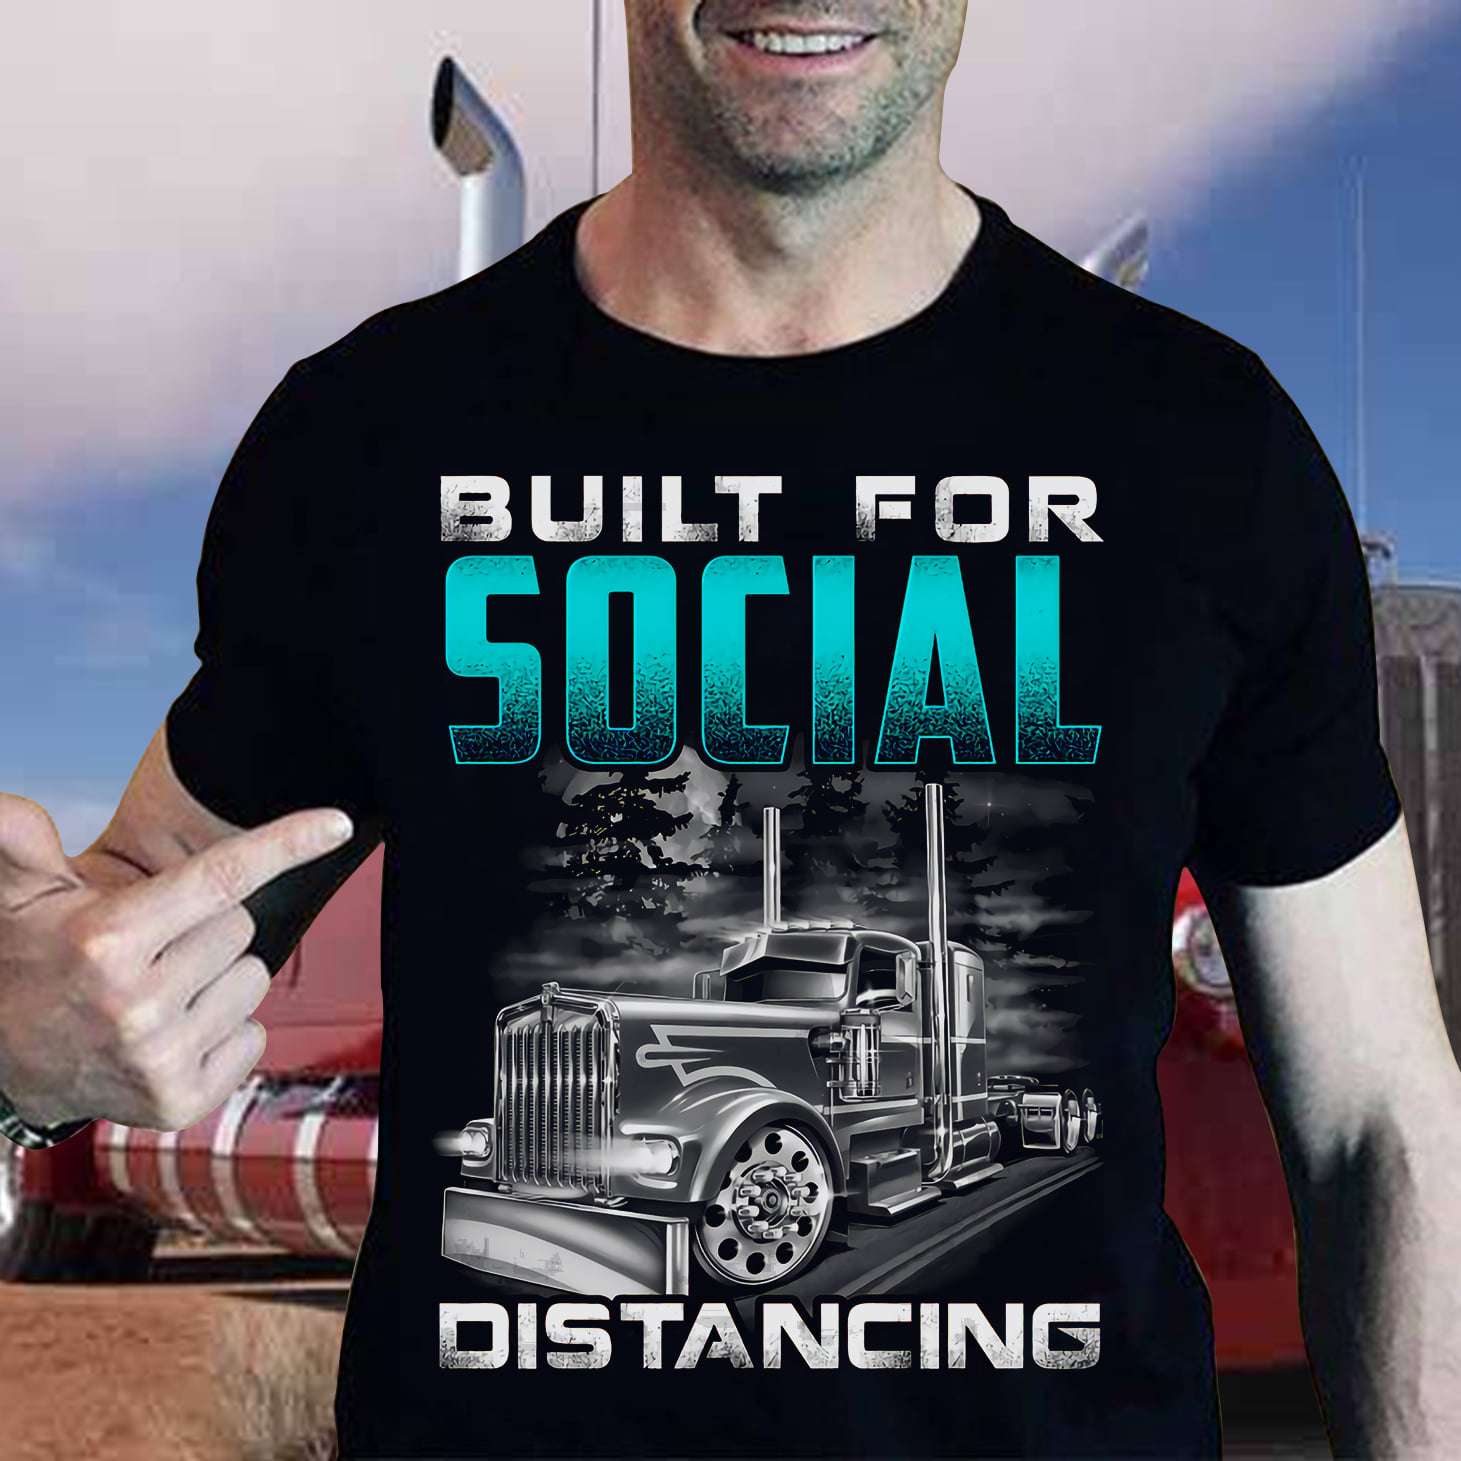 Truck in the darkness - Built for social distancing